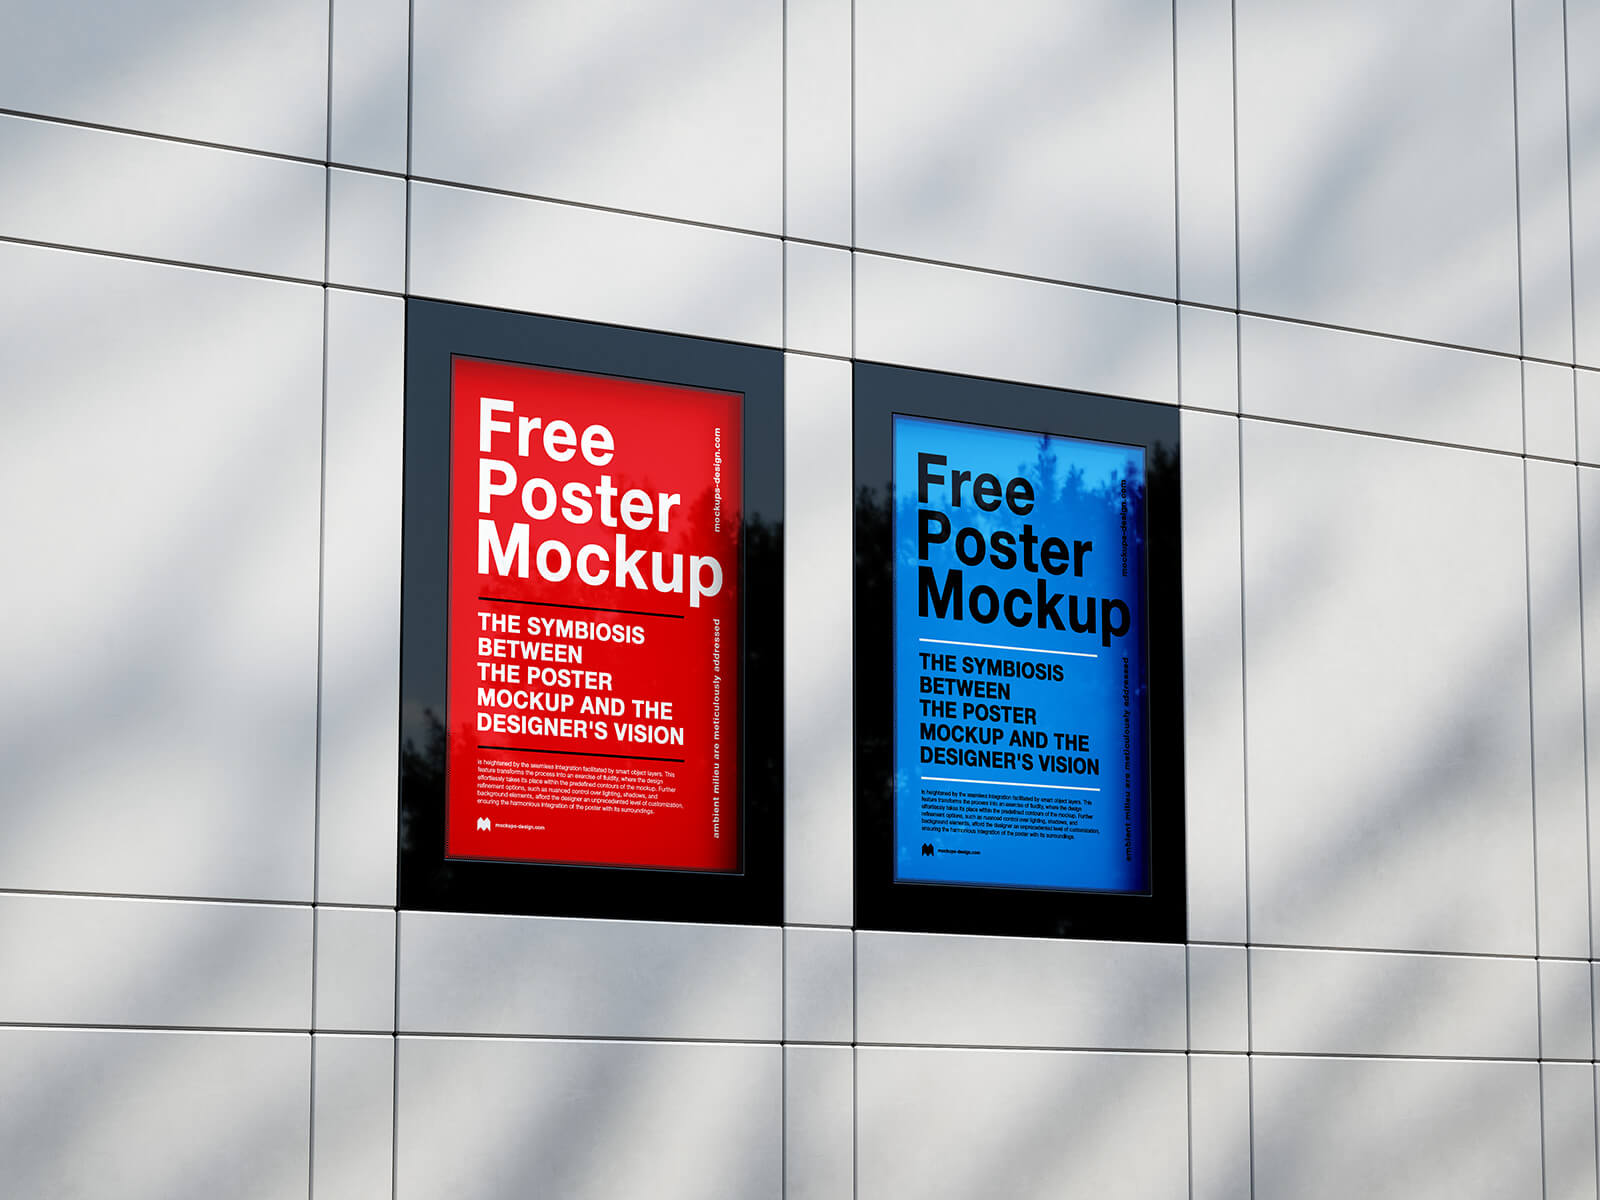 Free Wall Mounted Framed Poster Mockup PSD